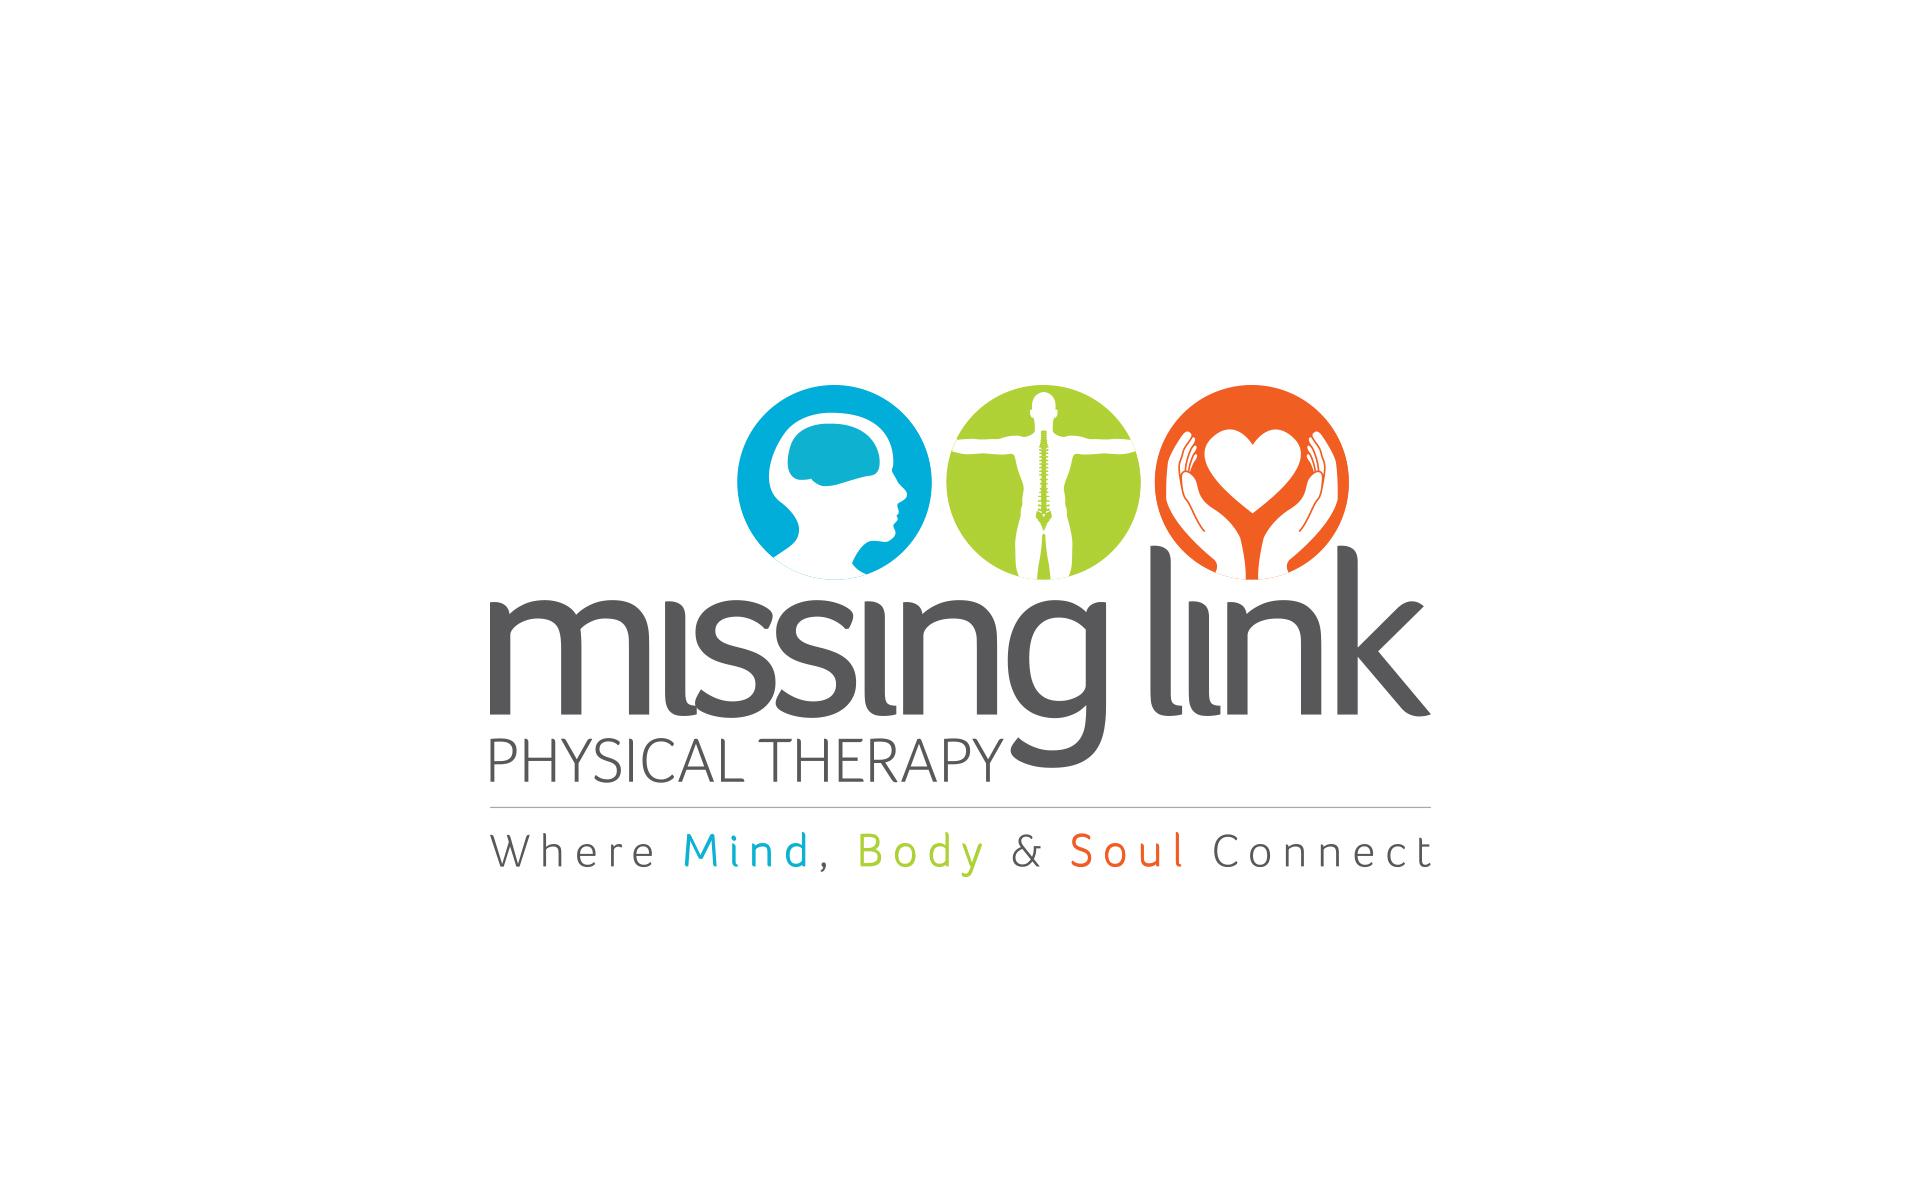 Missing Link Physical Therapy